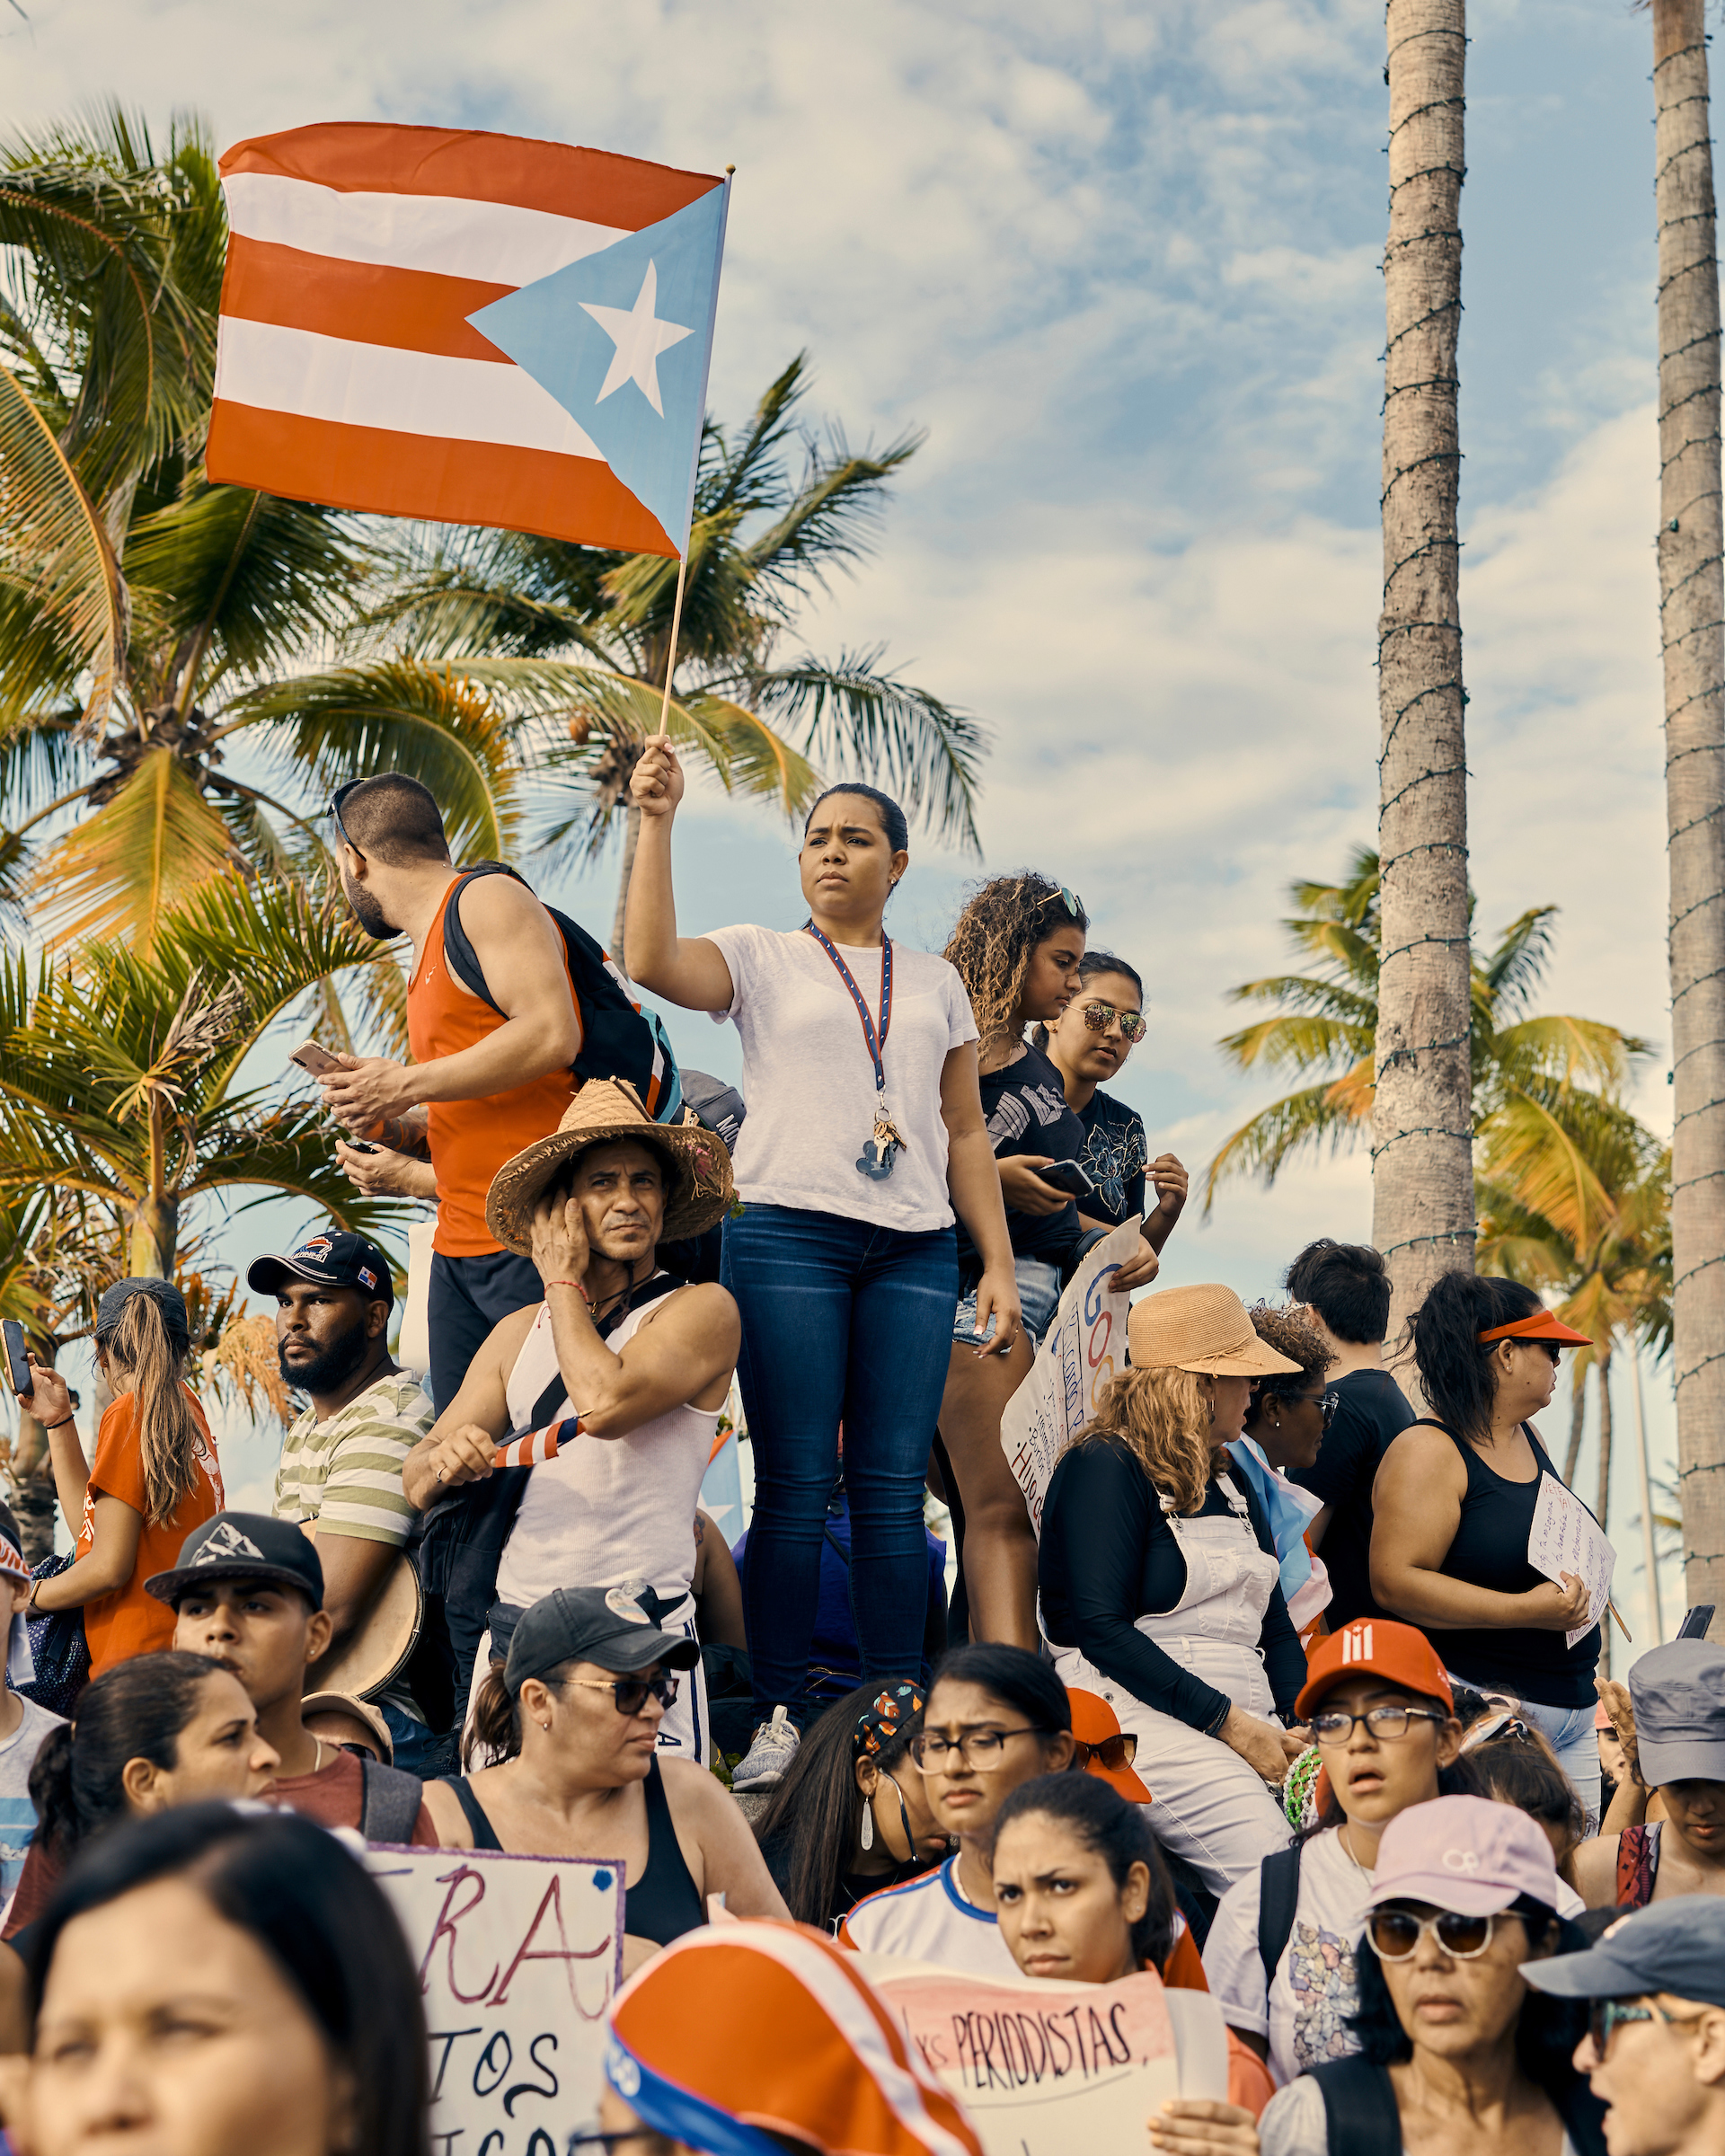 A woman waves a Puerto Rican flag at the anti-Rosselló protest in San Juan, Puerto Rico, on July 17, 2019.